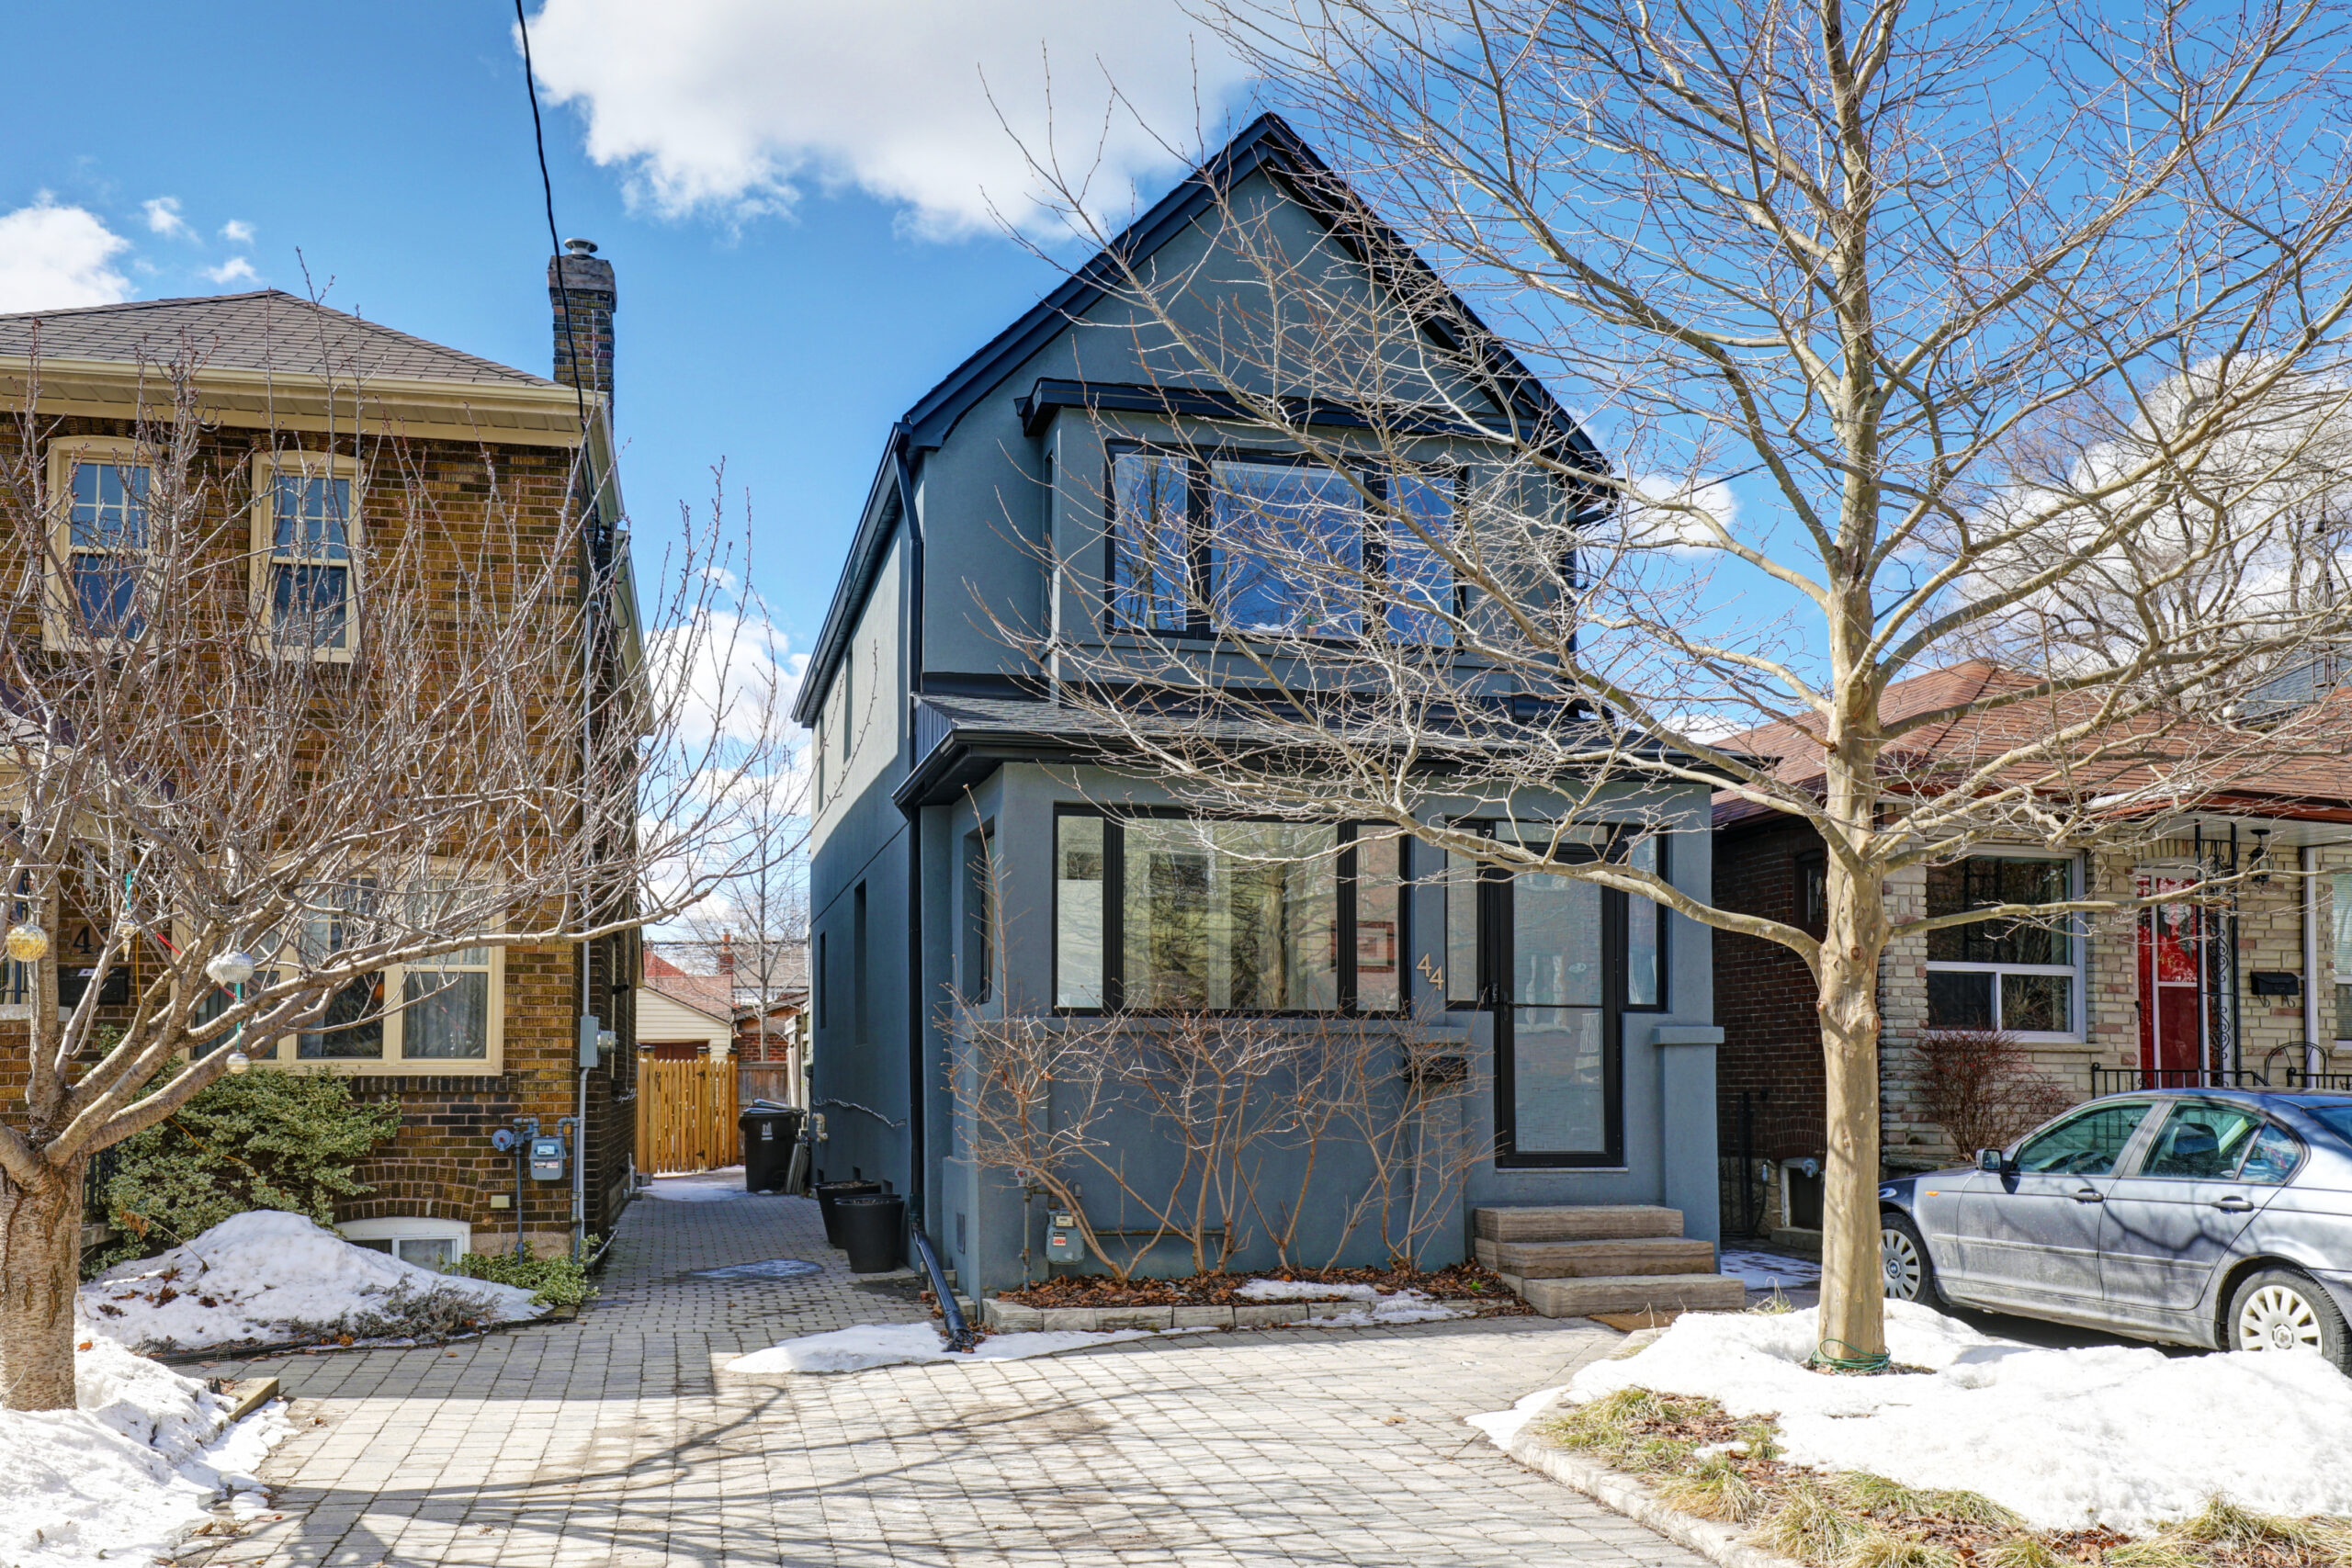 Sold- Toronto Detached Home on Priscilla Ave